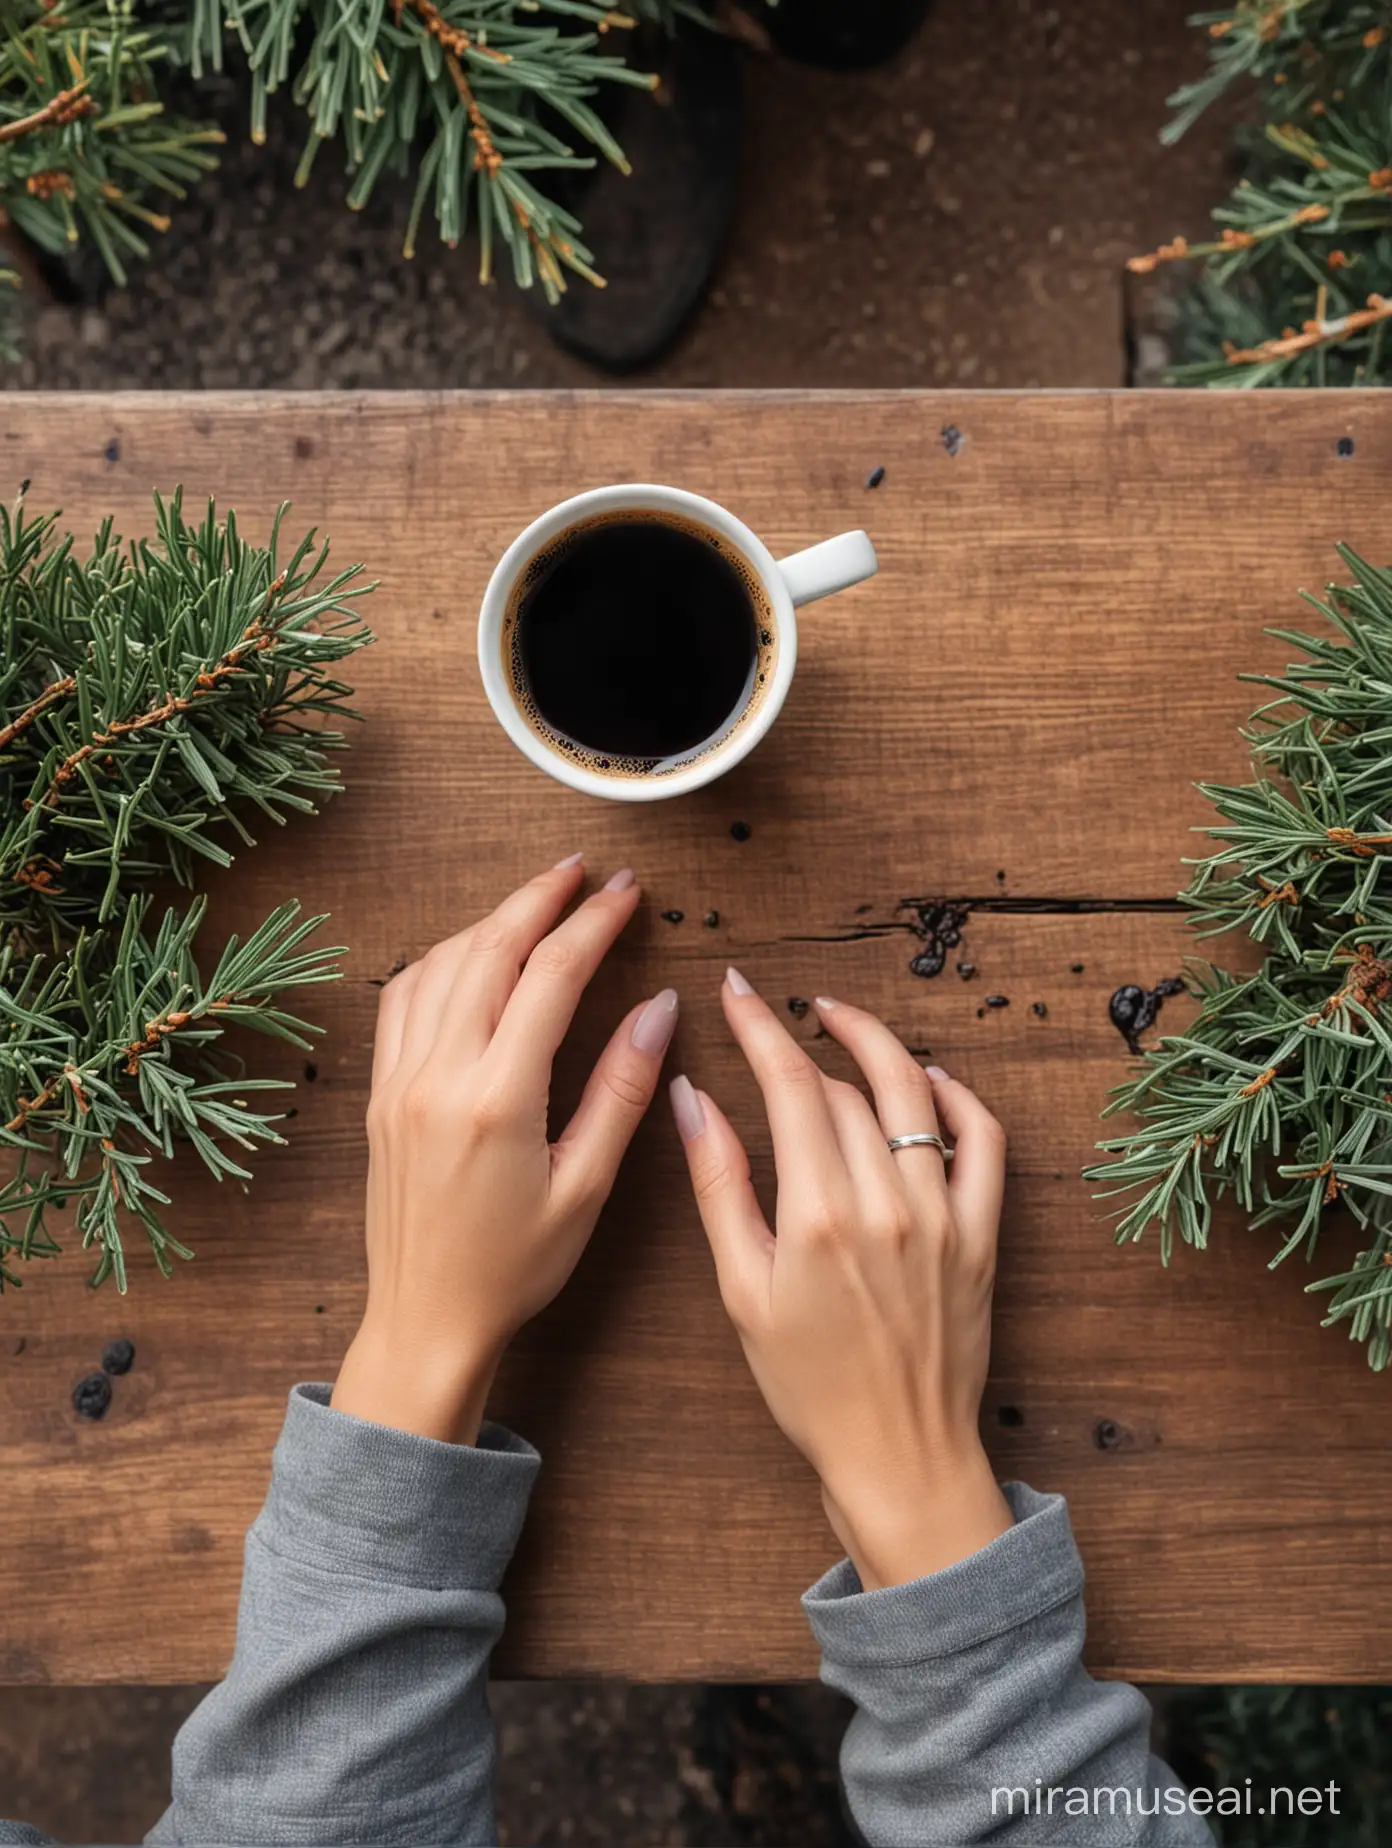 Woman Enjoying Hot Coffee in Outdoor Caf with Pine Trees Background